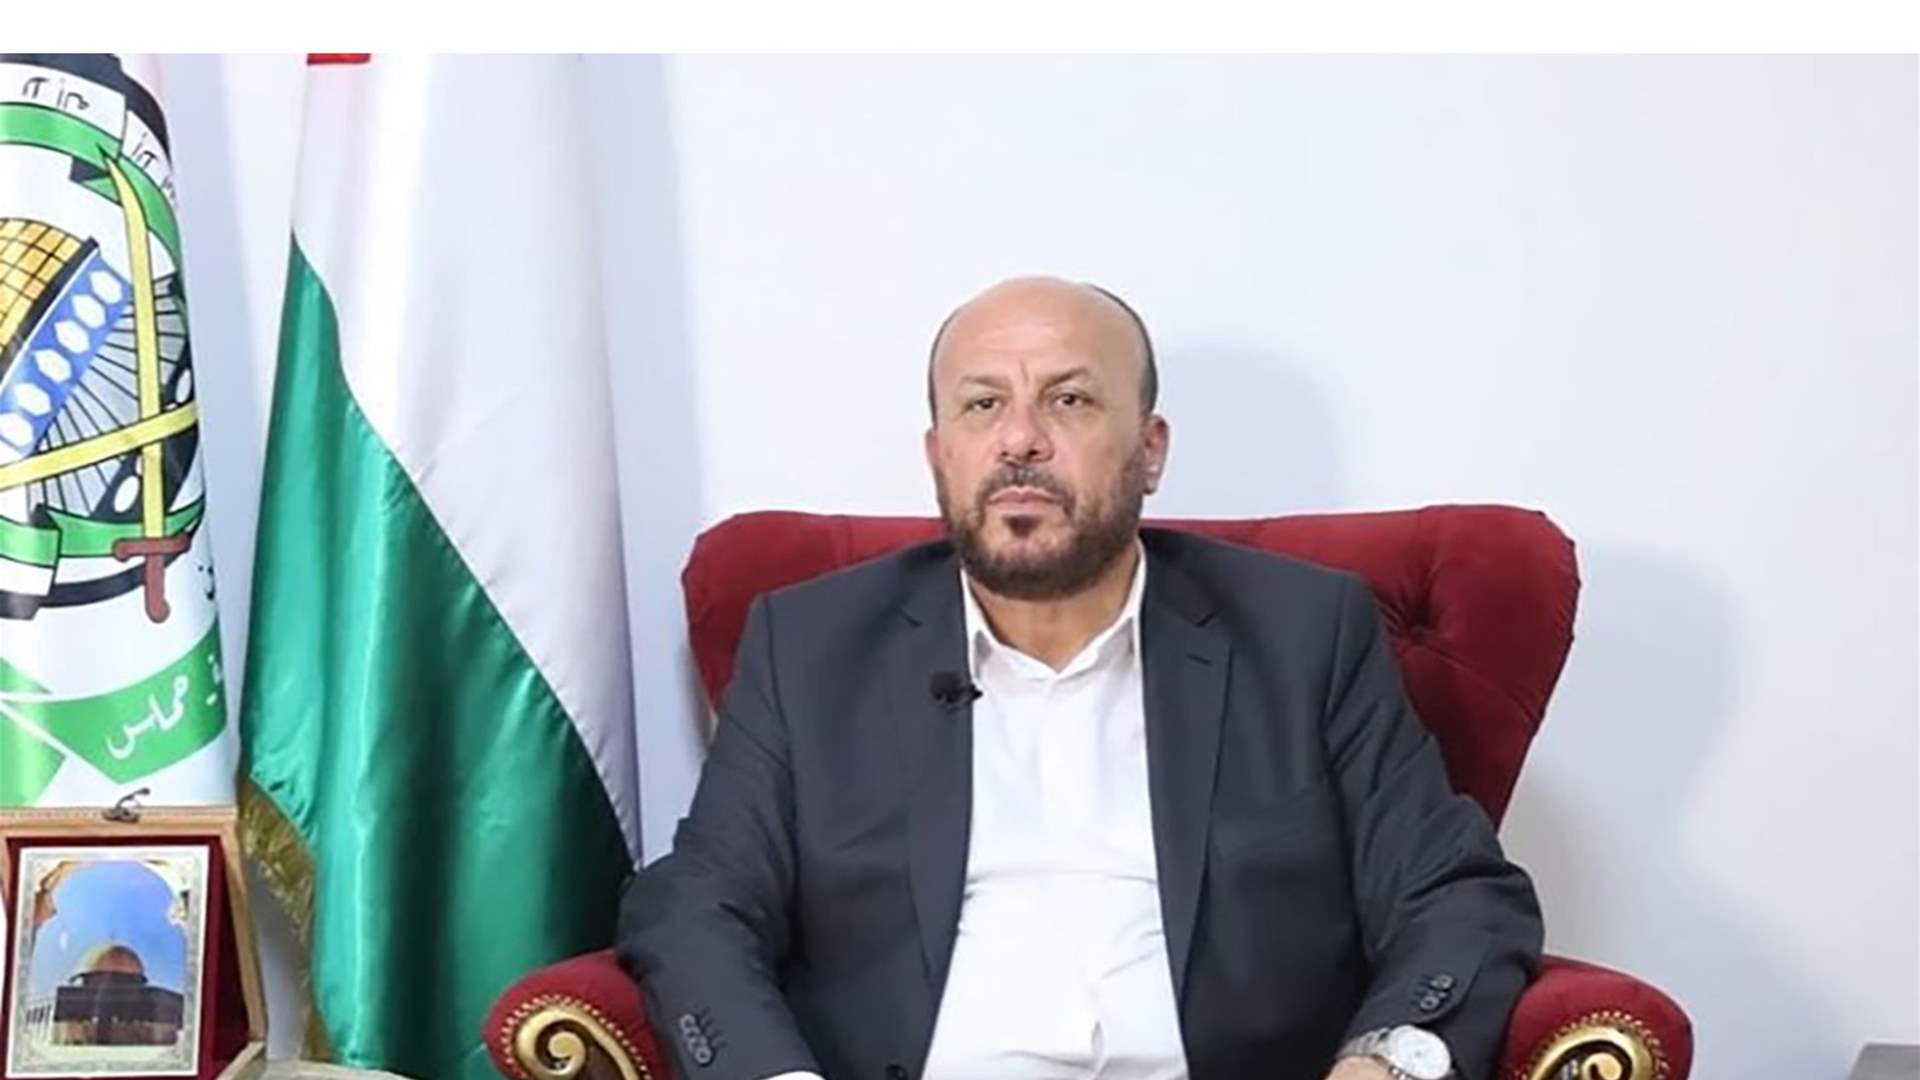 Hamas representative in Lebanon to LBCI: It is as if those who arranged the truce wanted it to be extended